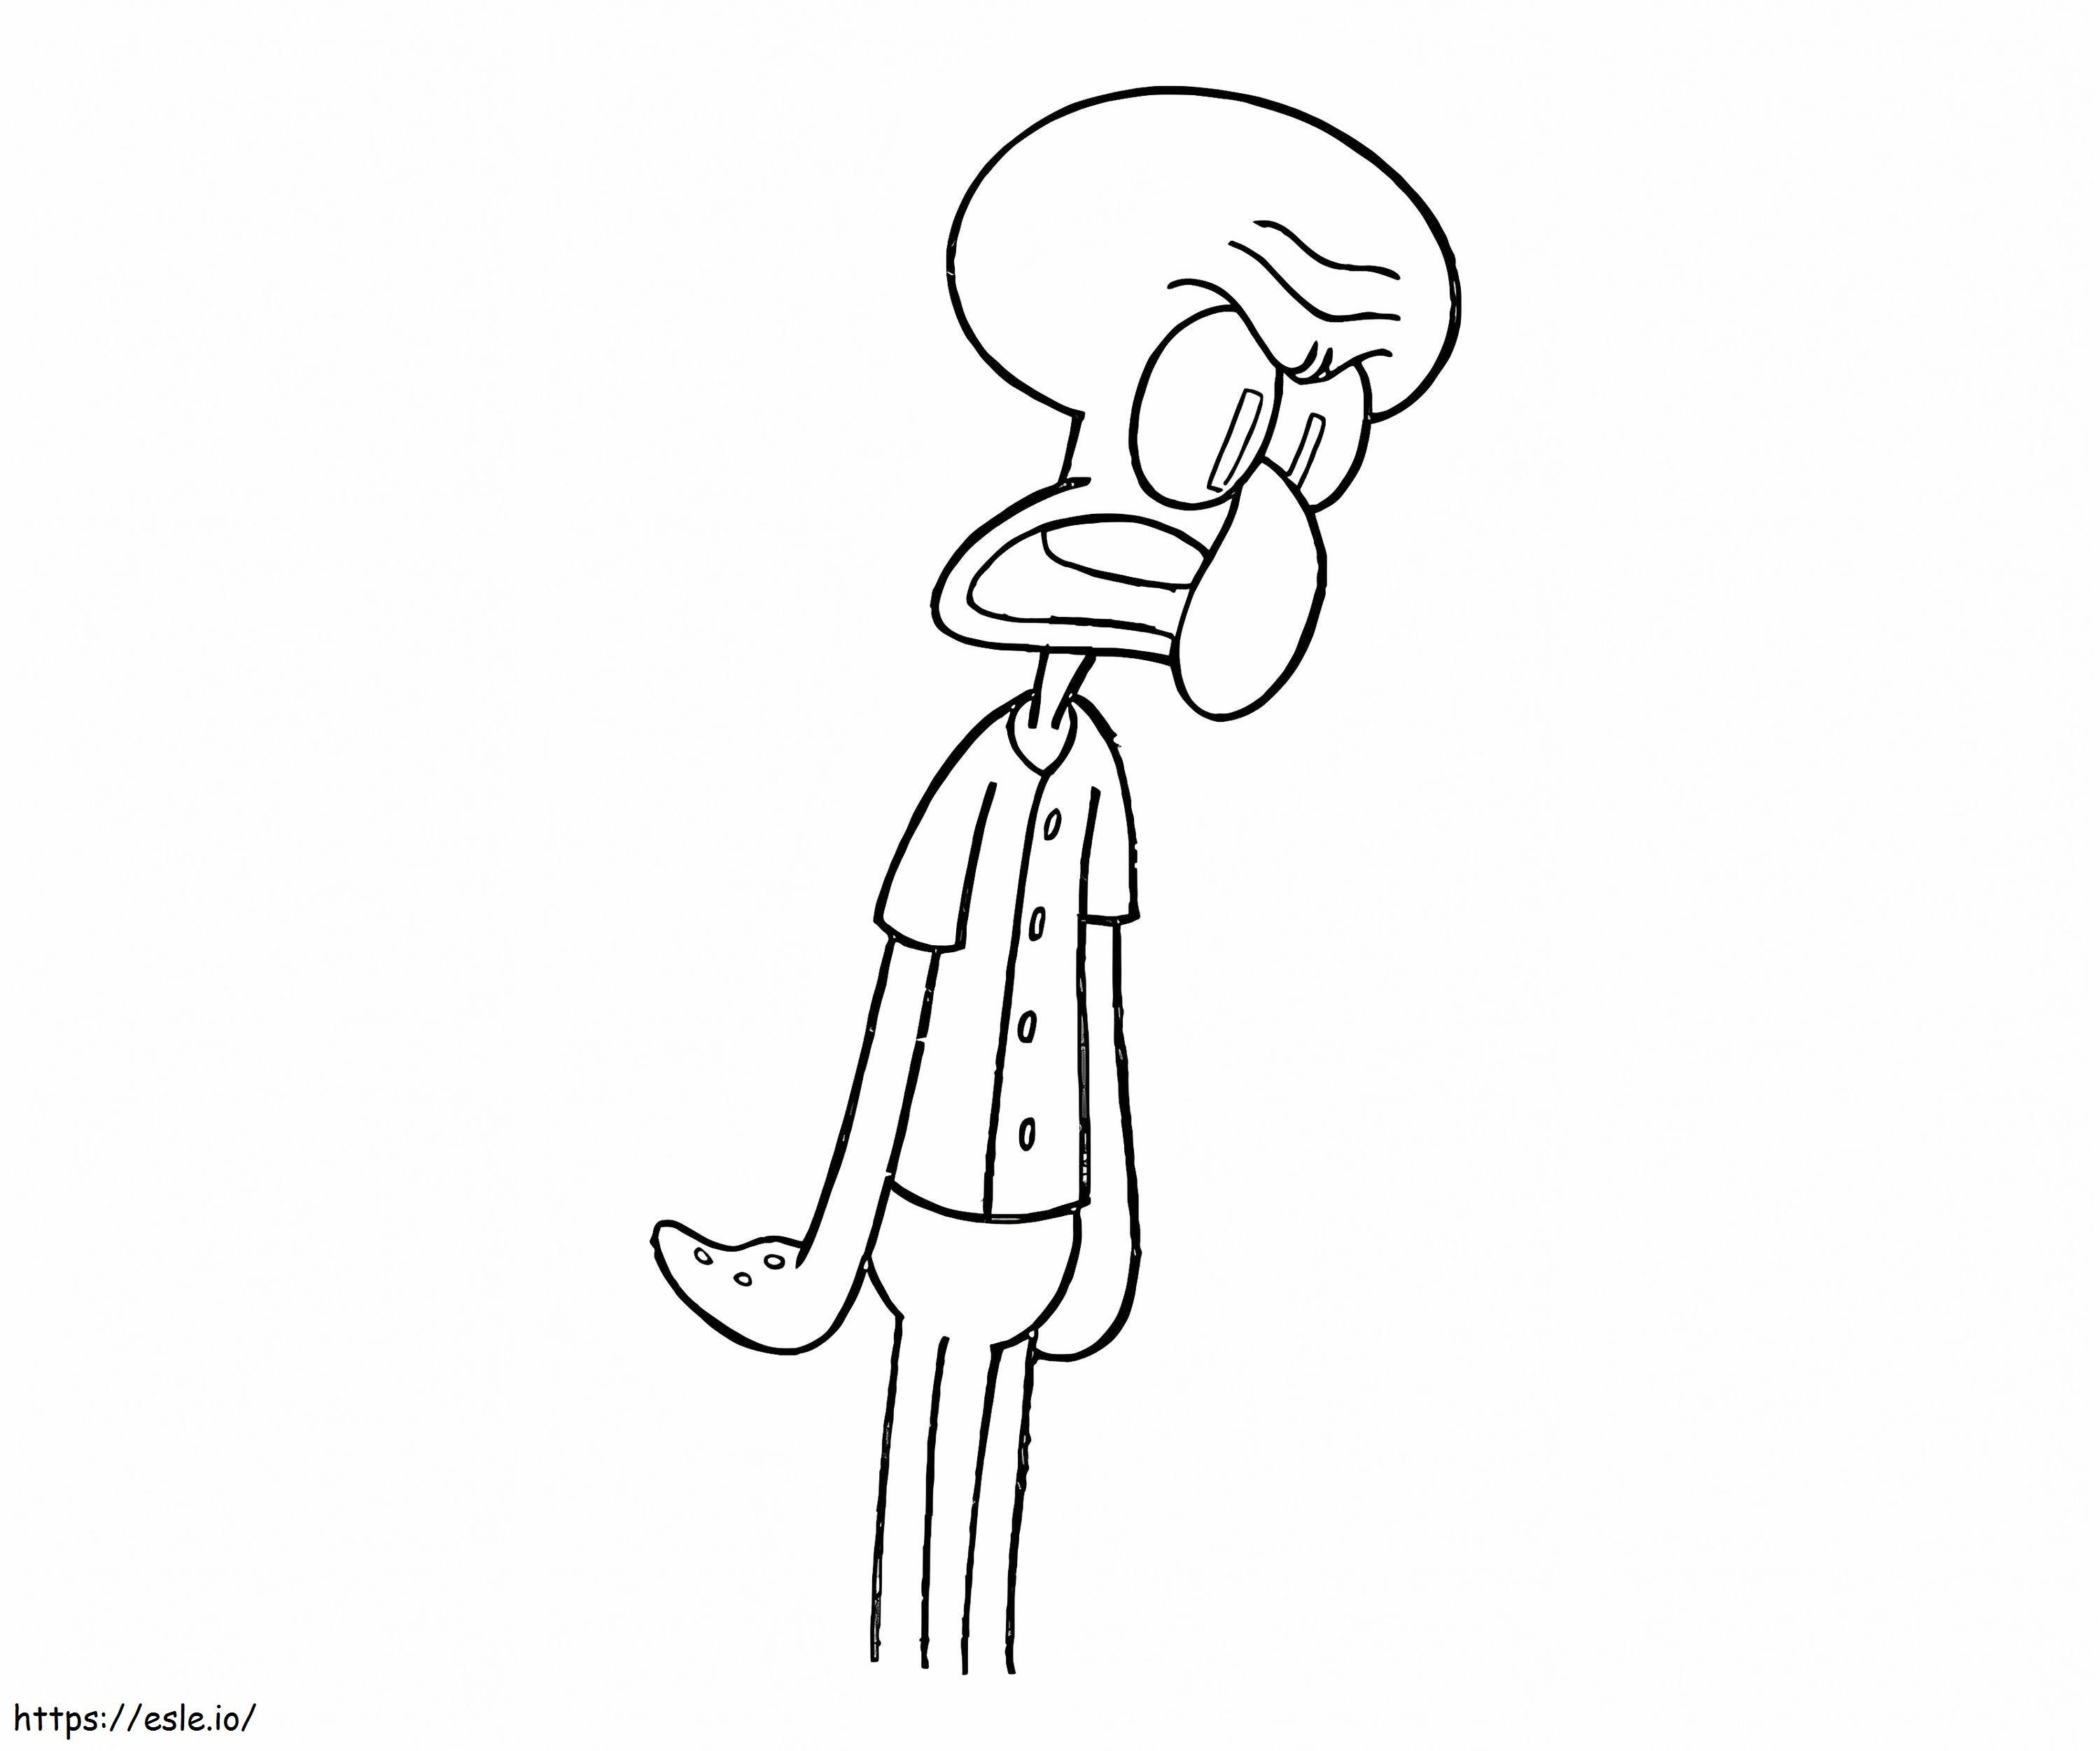 Squidward Is Angry coloring page